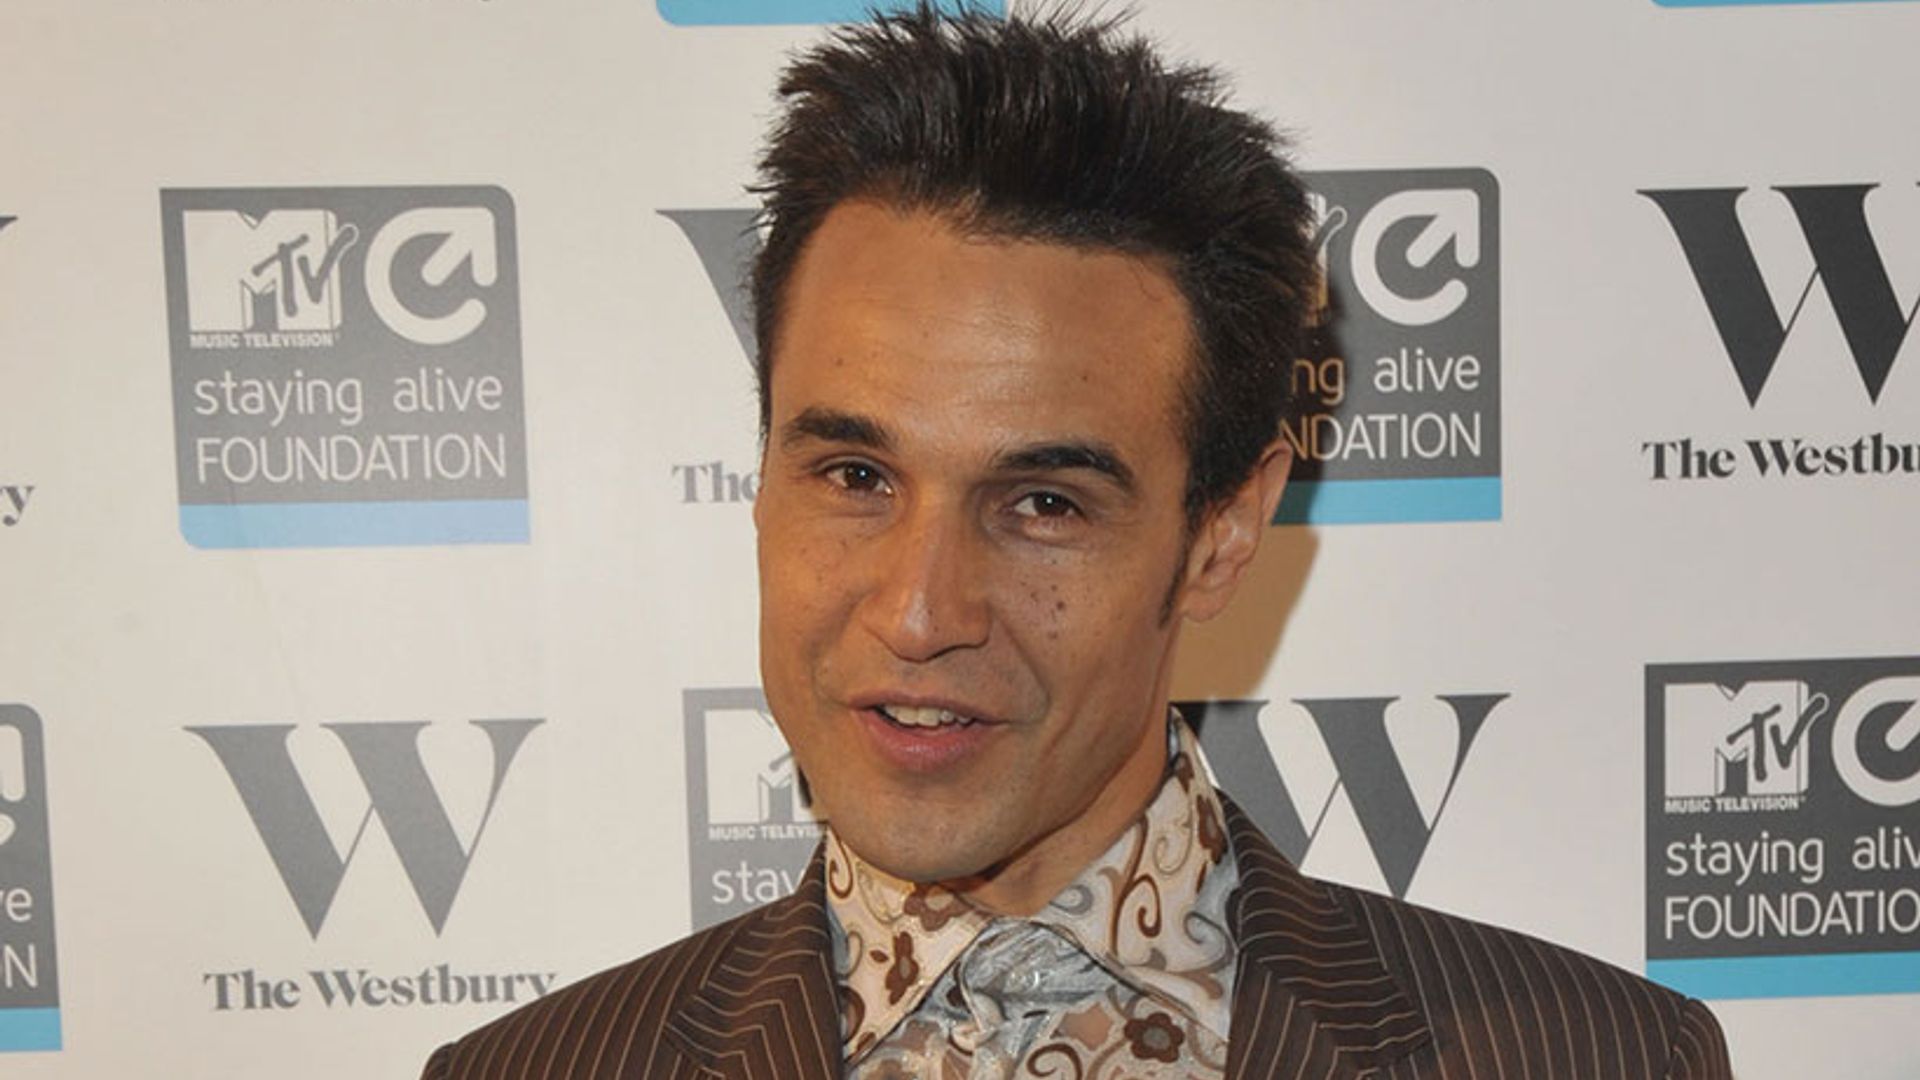 Revealed: X Factor star Chico suffered life-threatening blood clot on the brain